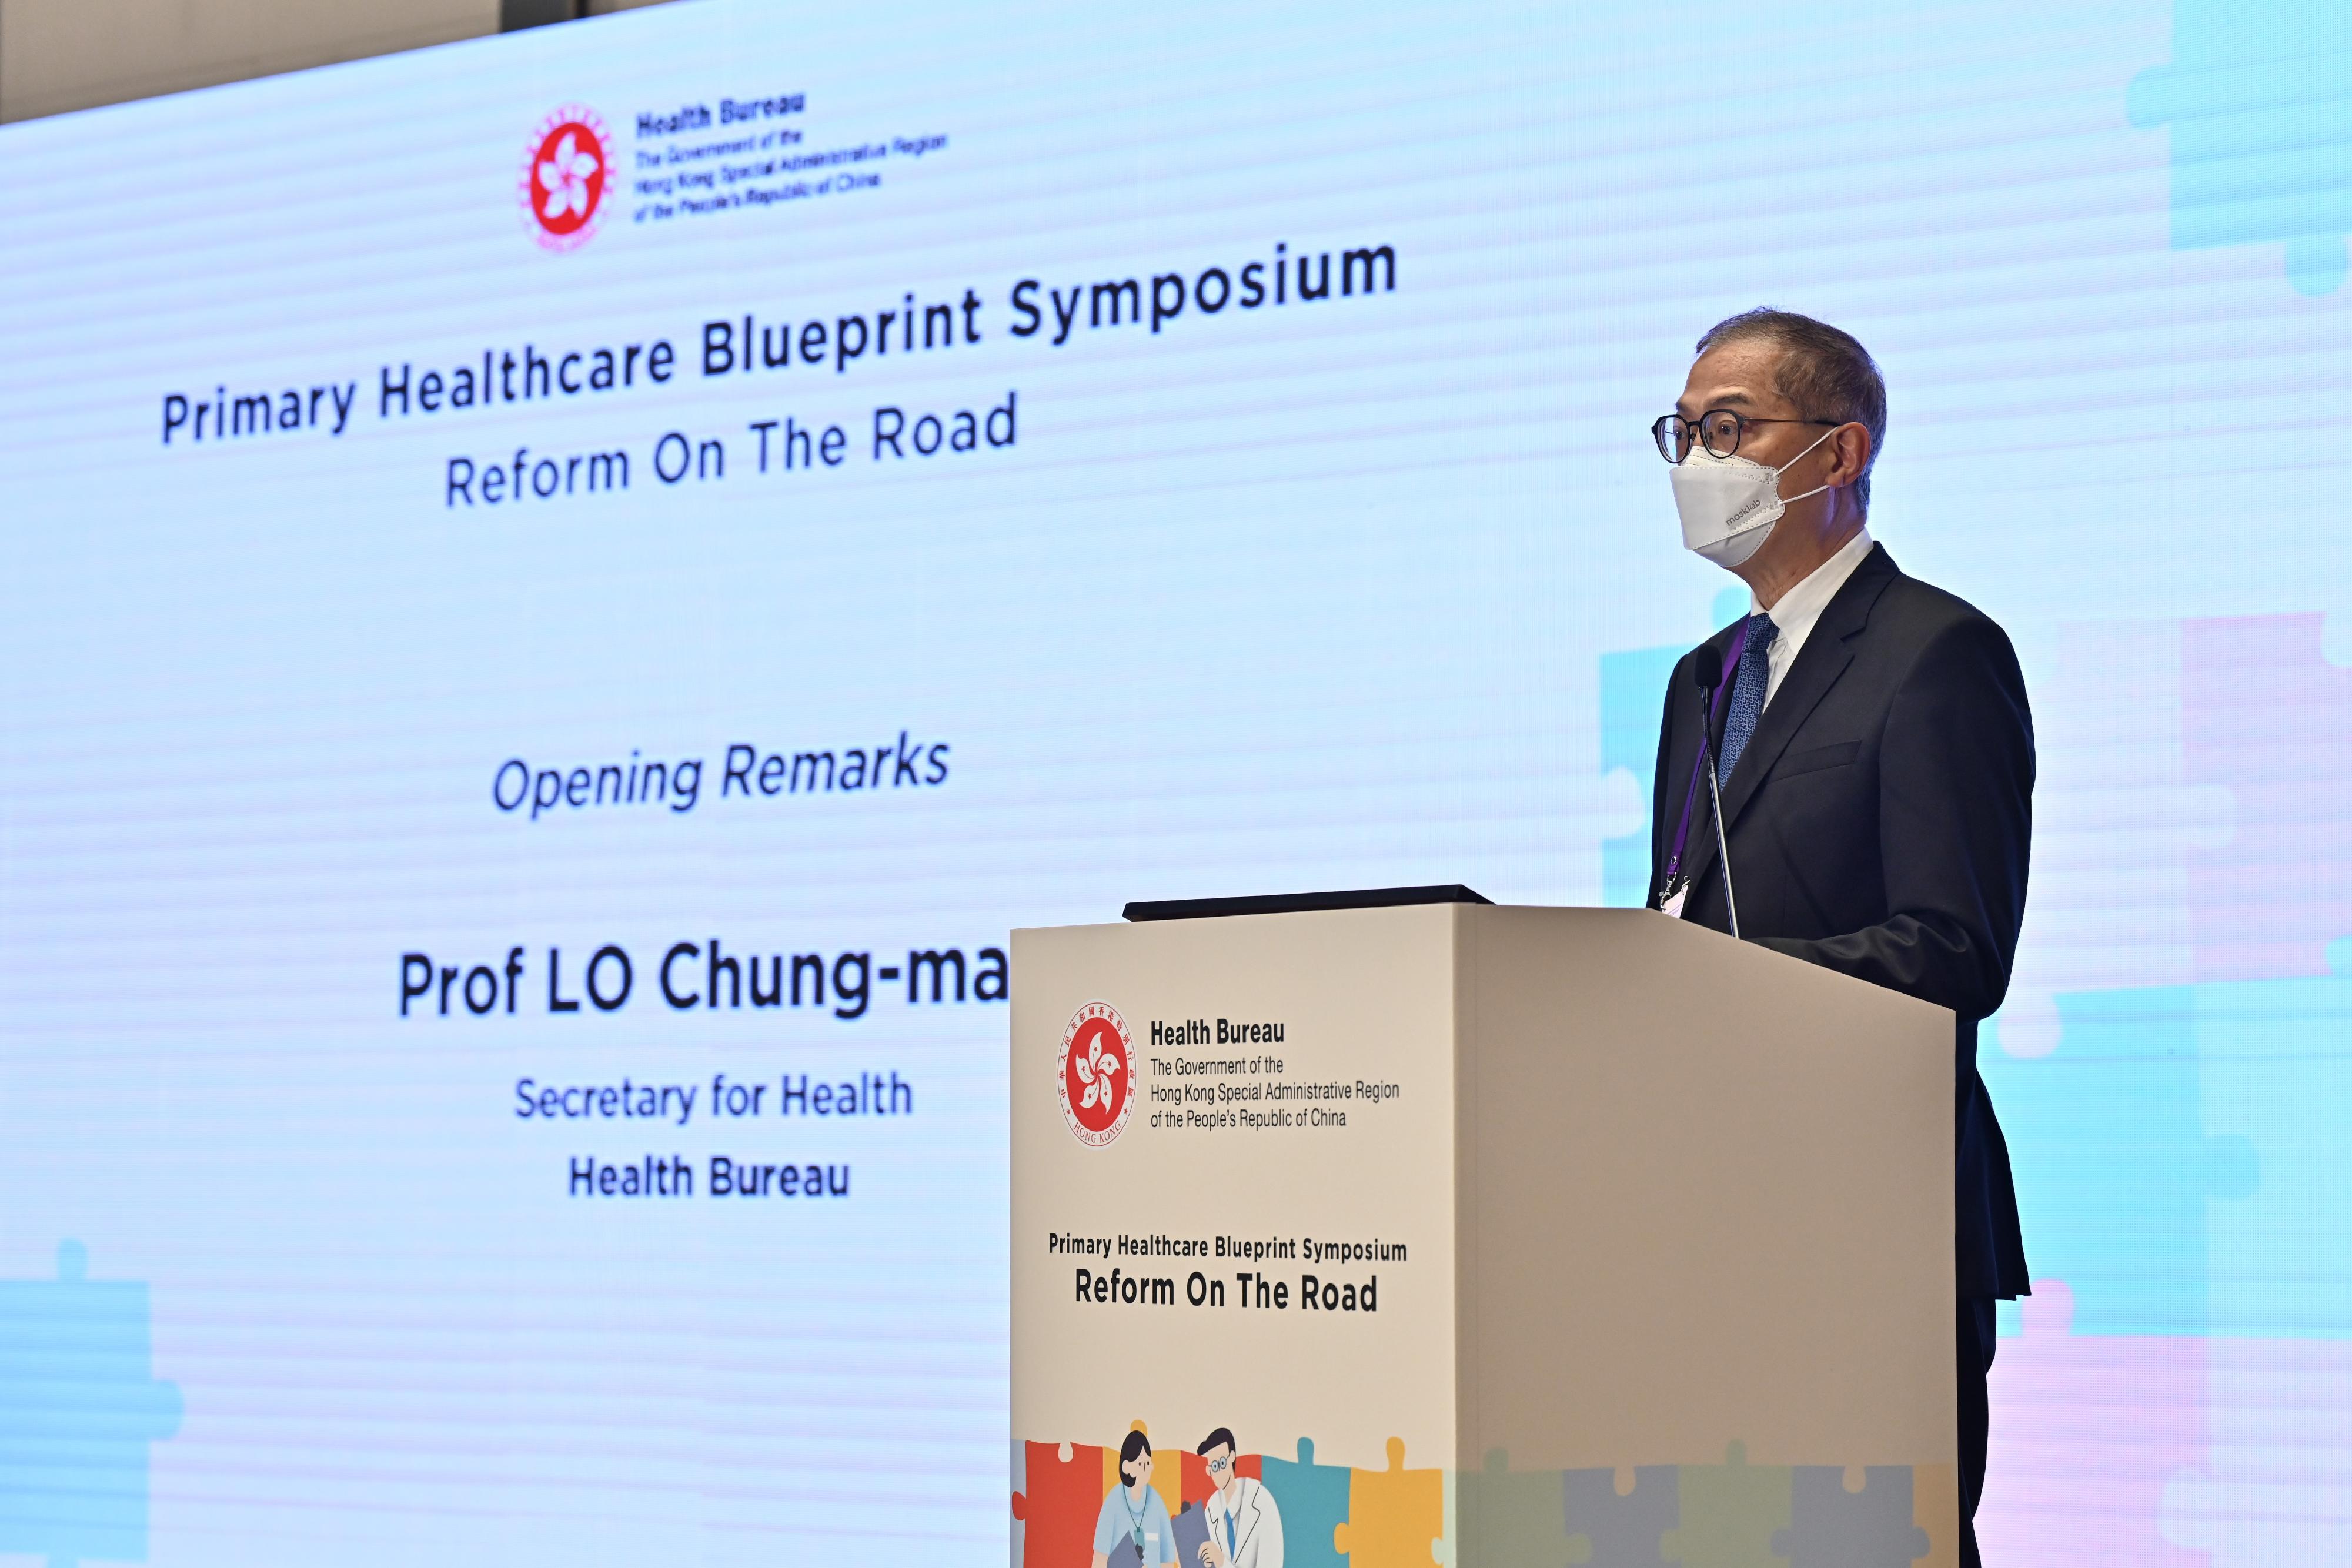 The Primary Healthcare Blueprint Symposium with the theme "Reform On The Road", organised by the Health Bureau, was held today (January 15) at the Central Government Offices. The Secretary for Health, Professor Lo Chung-mau, delivers his opening remarks at the Symposium. 